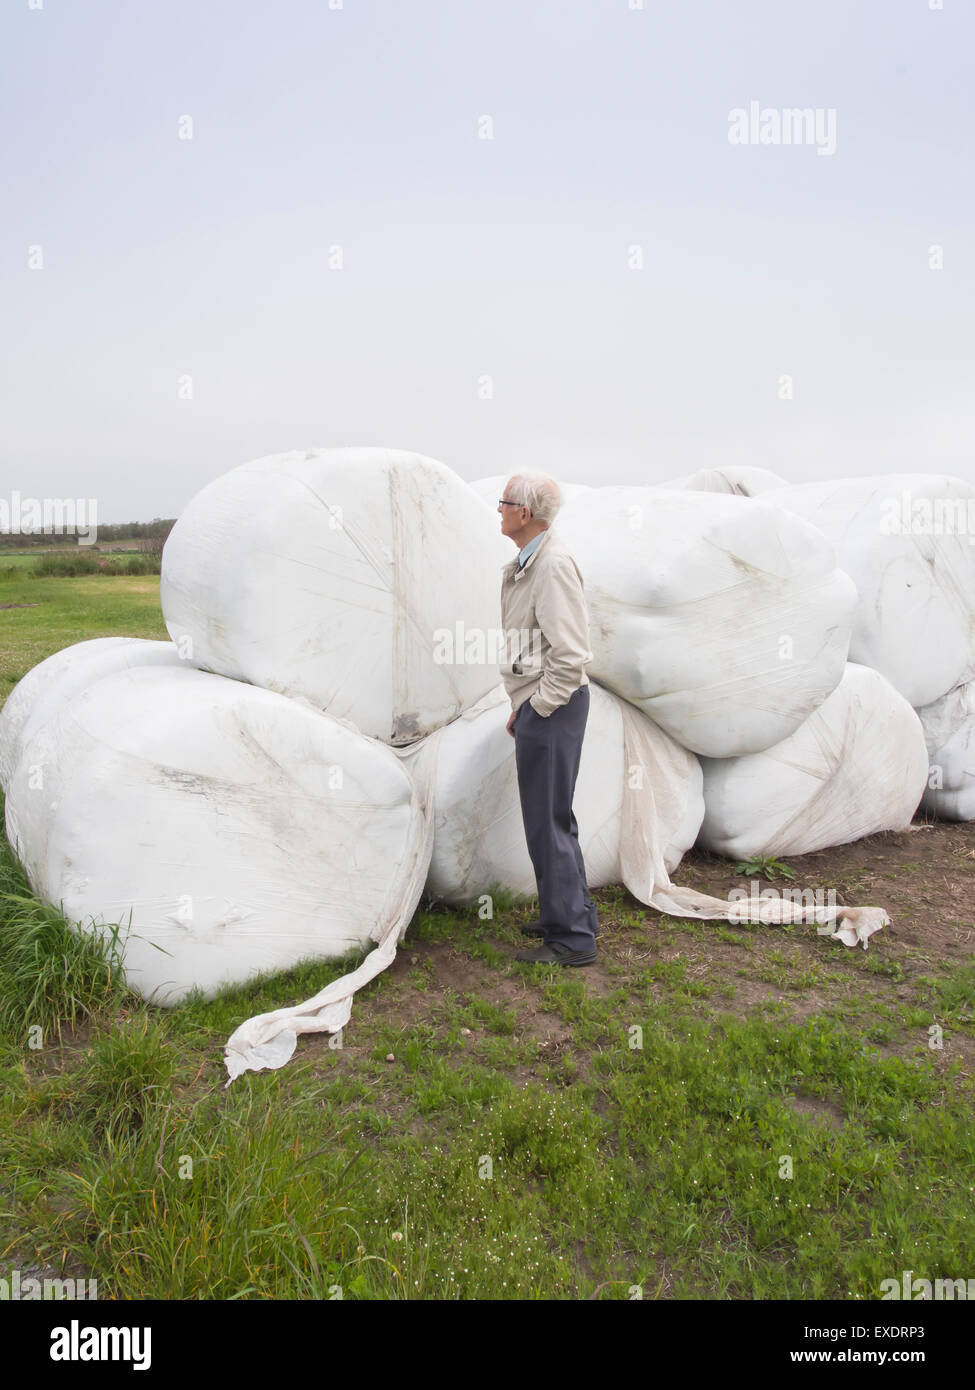 Senior citizen inspecting grass for animal fodder tightly wrapped in plastic silage bales Stock Photo